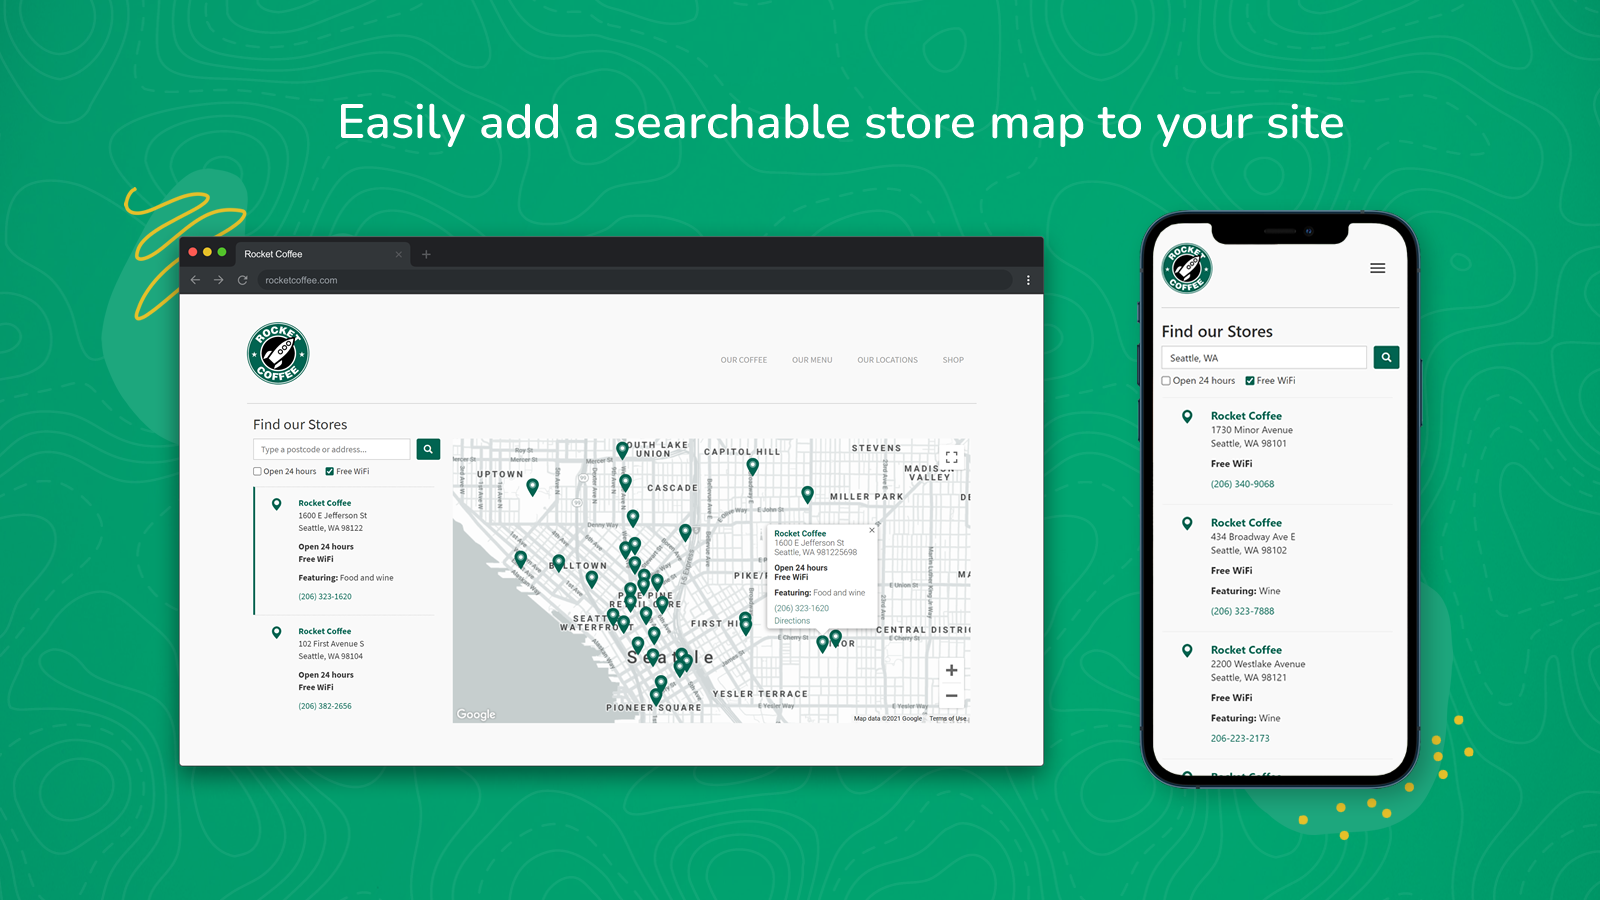 Easily add a searchable store map to your site